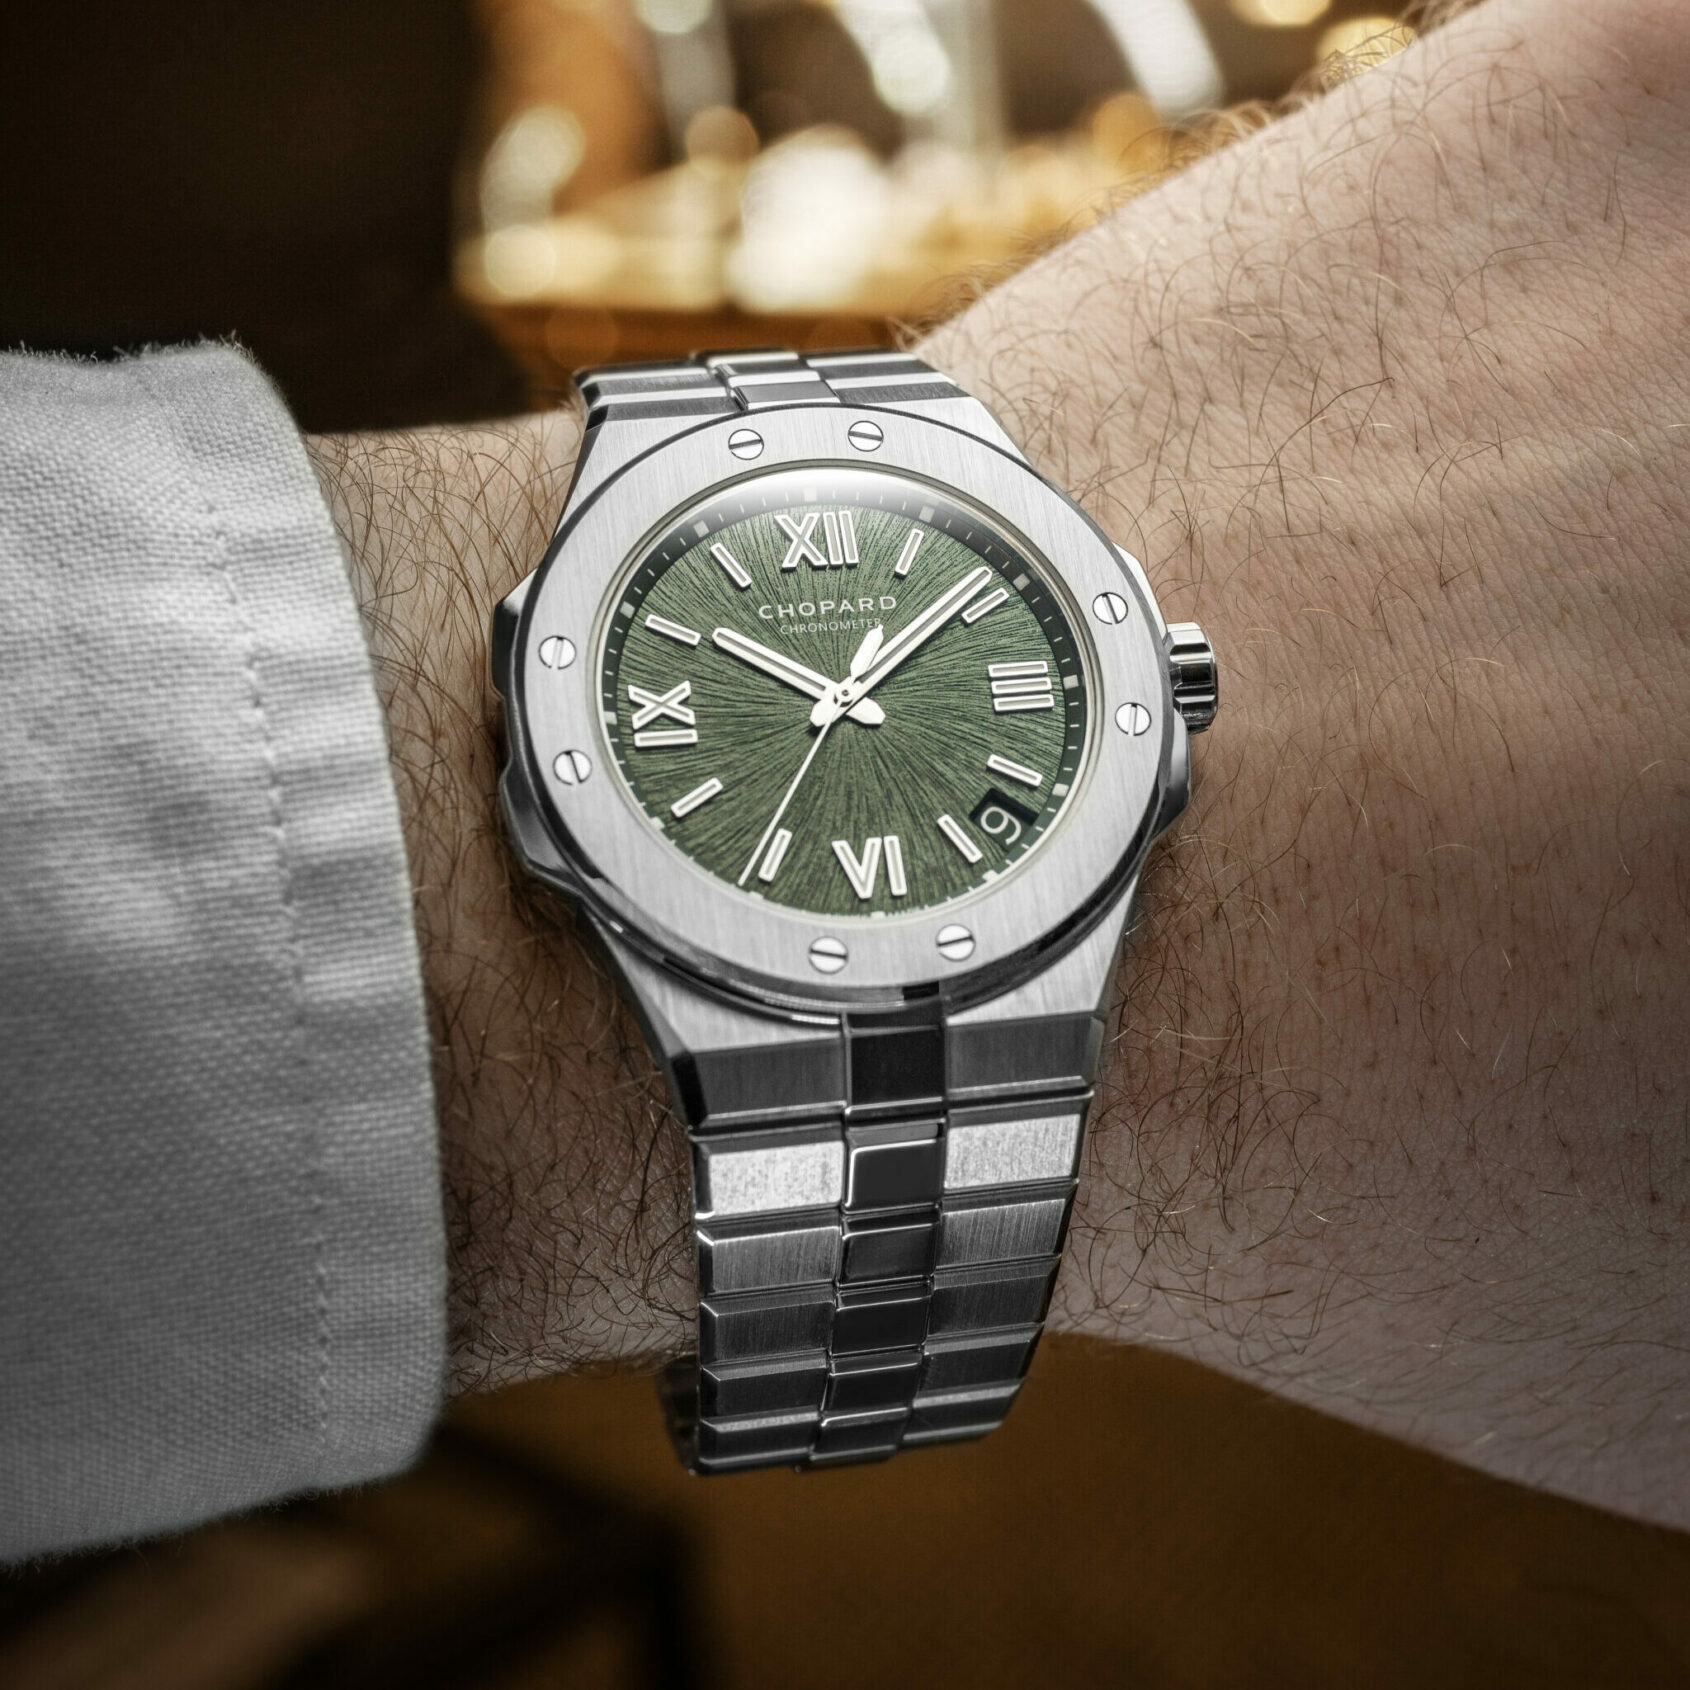 Chopard Alpine Eagle 41 MM Green dial 298600-3014 for $16,200 for sale from  a Private Seller on Chrono24